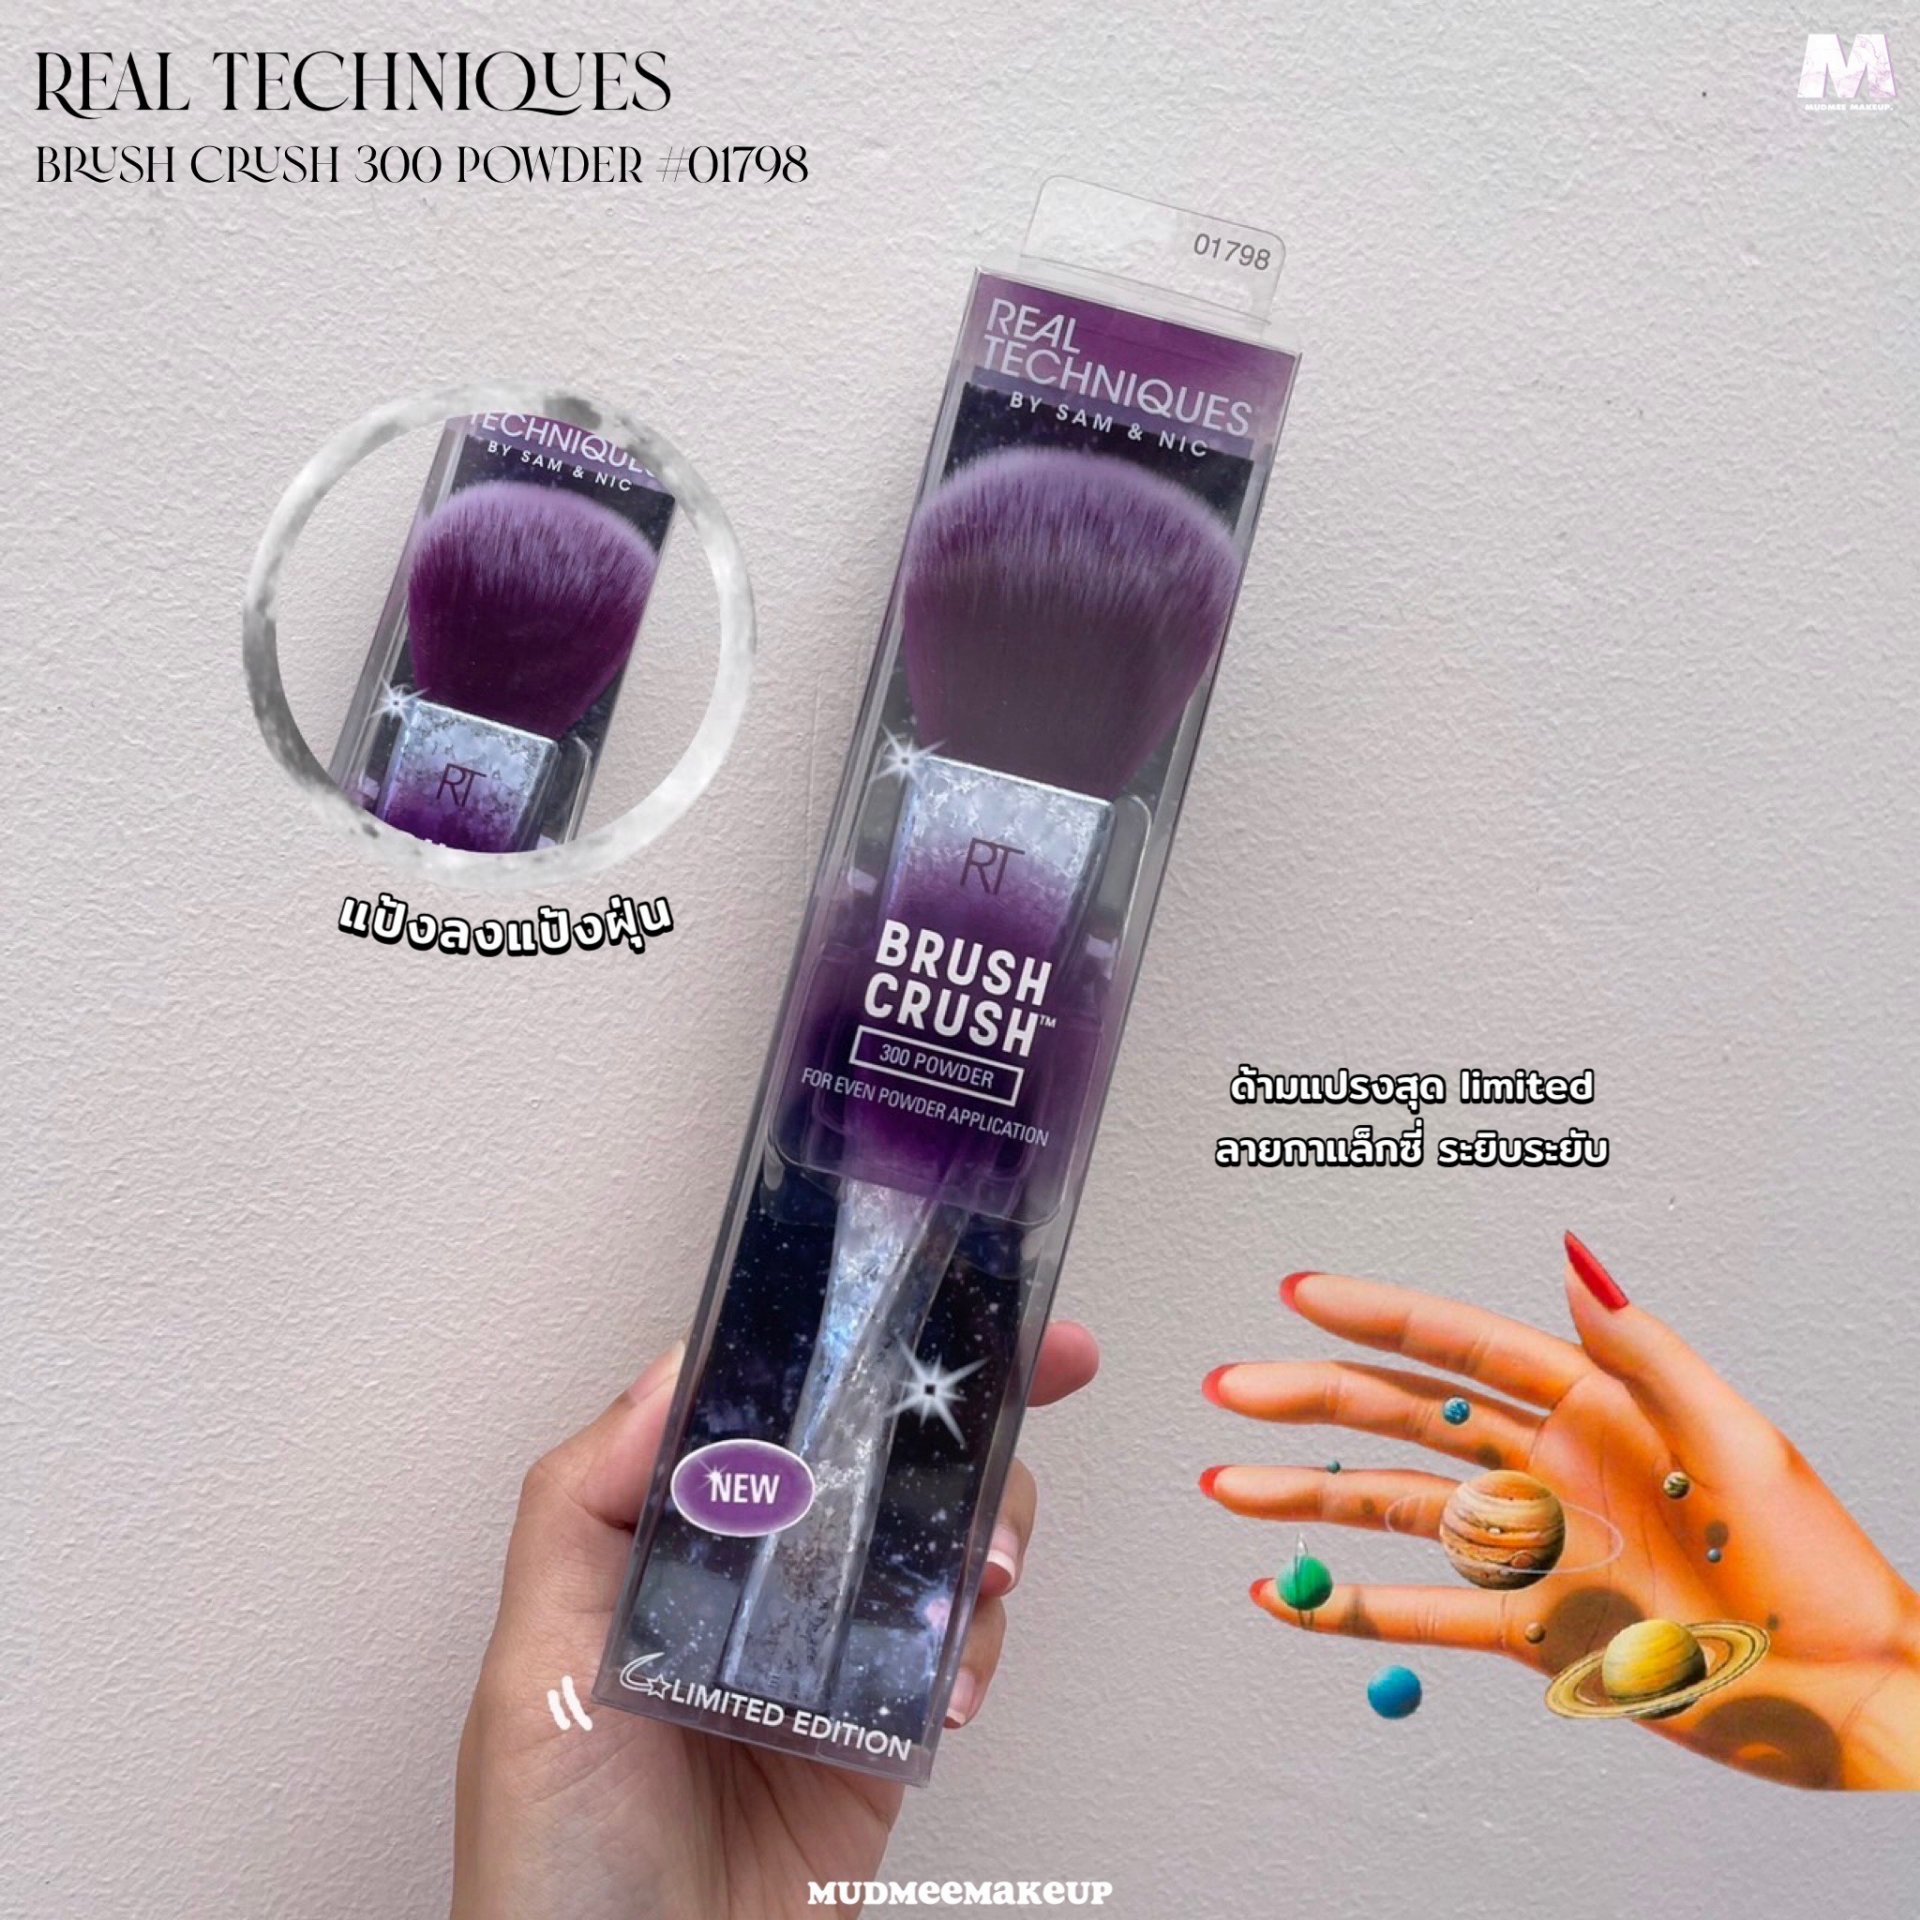 REAL TECHNIQUES Limited Edition Brush Crush 300 Powder #01798